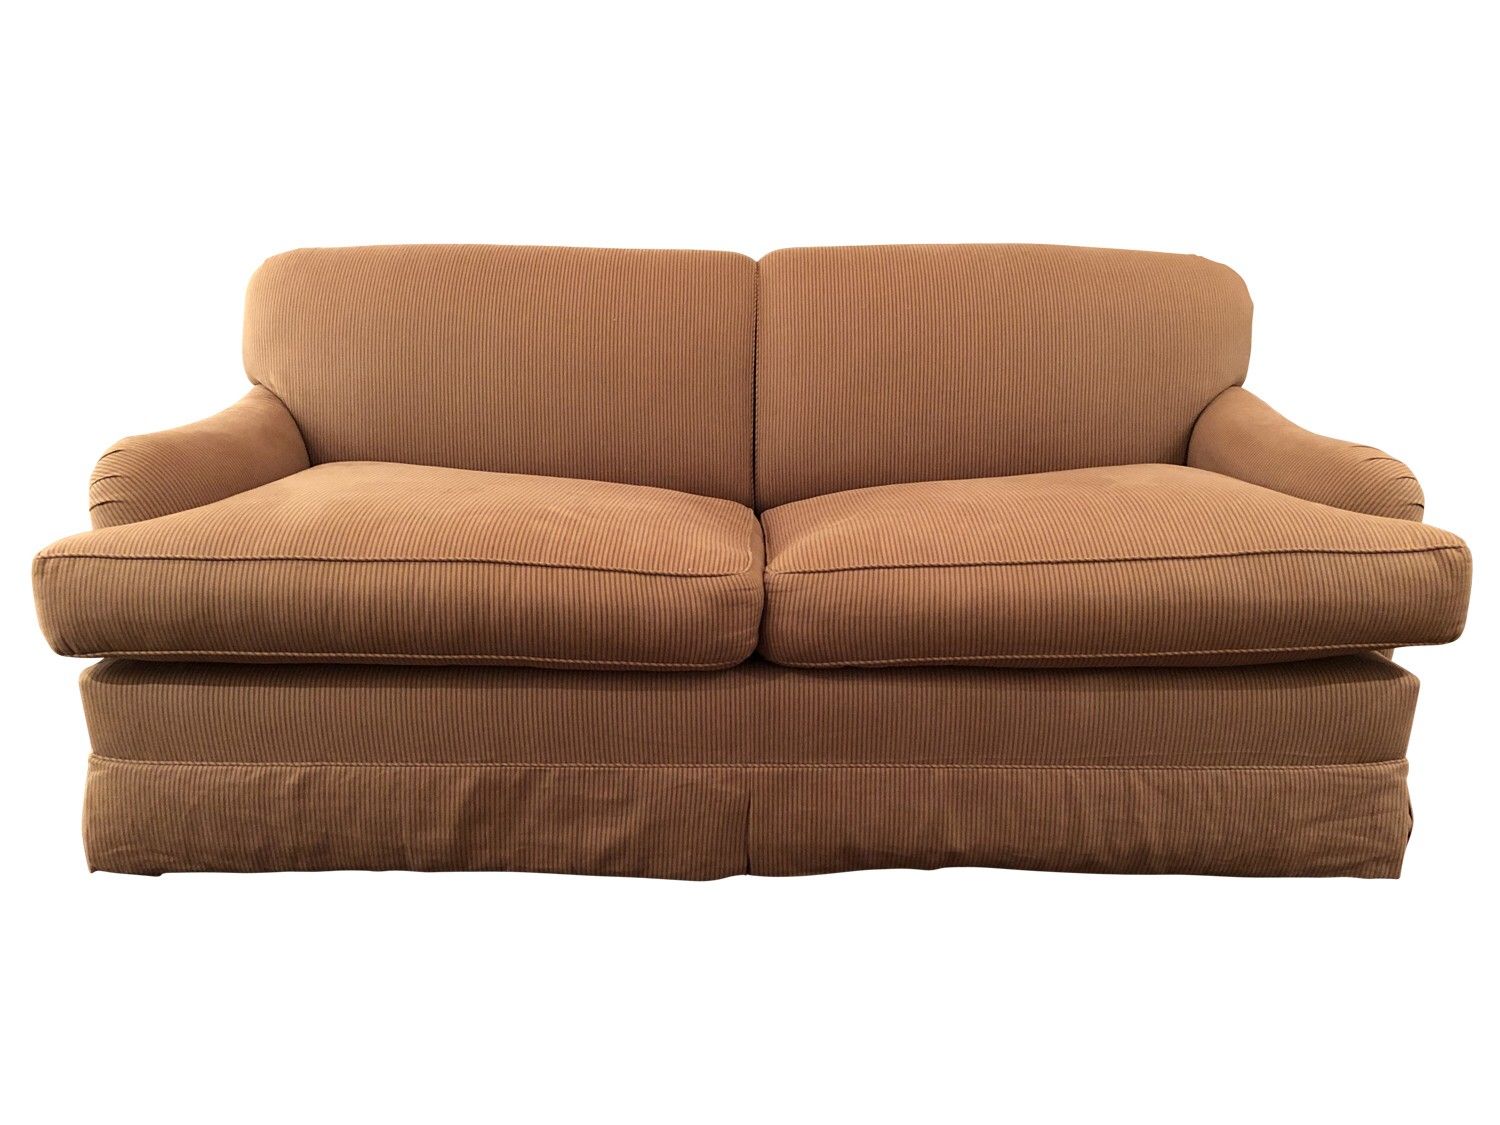 Custom Convertible Sofa • The Local Vault With Convertible Sofas (View 1 of 15)